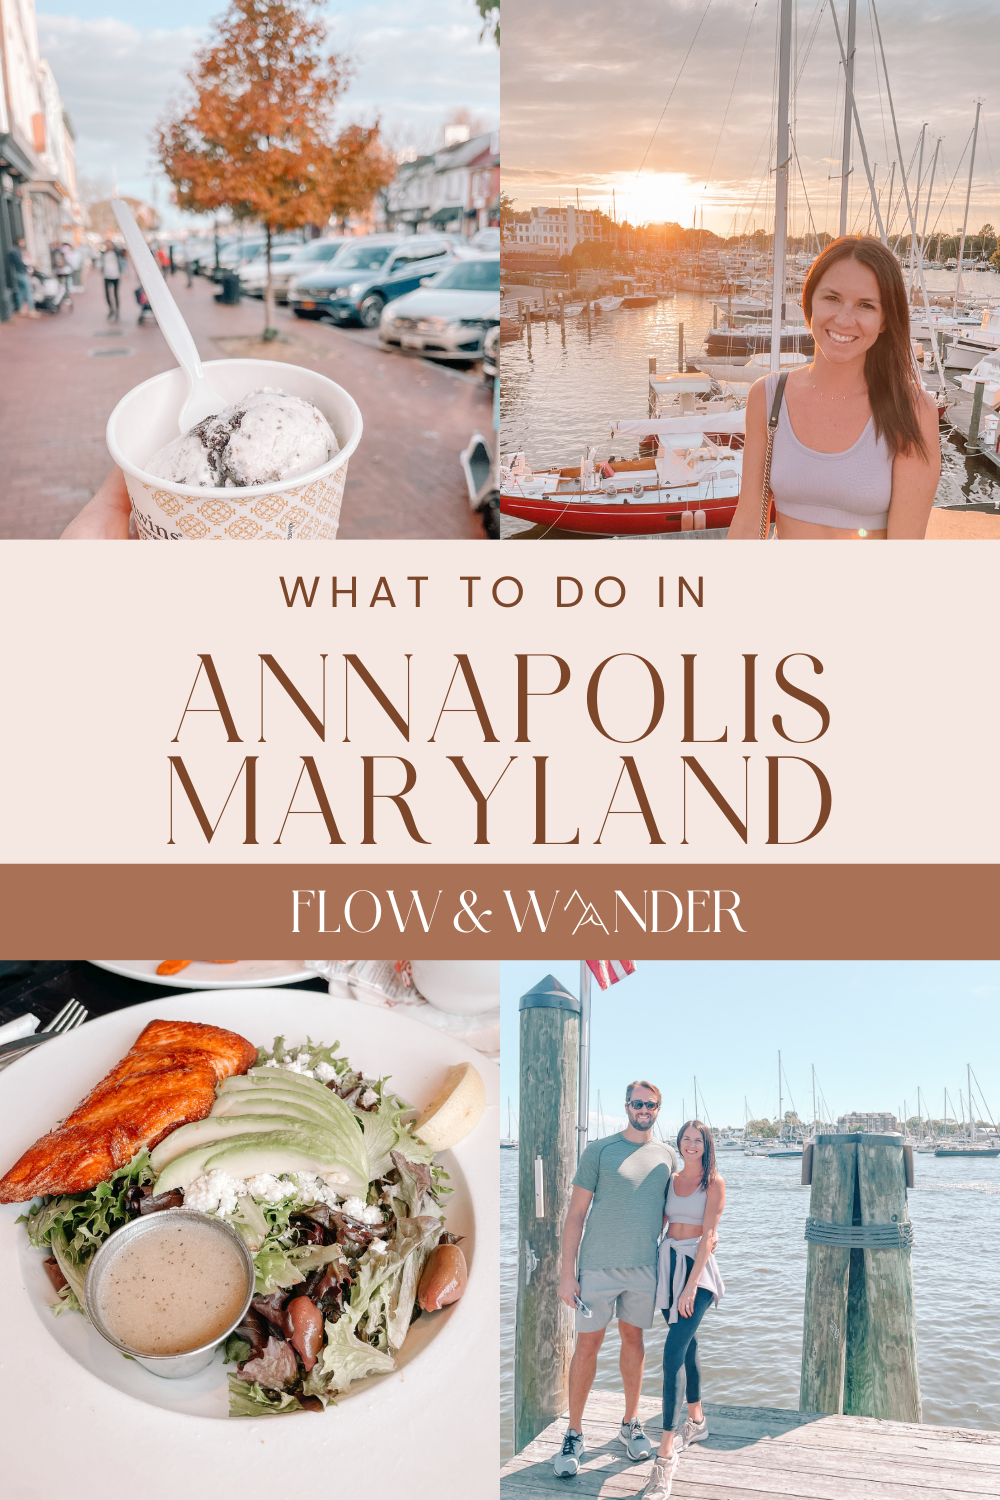 3annapolis-maryland-travel-guide.png